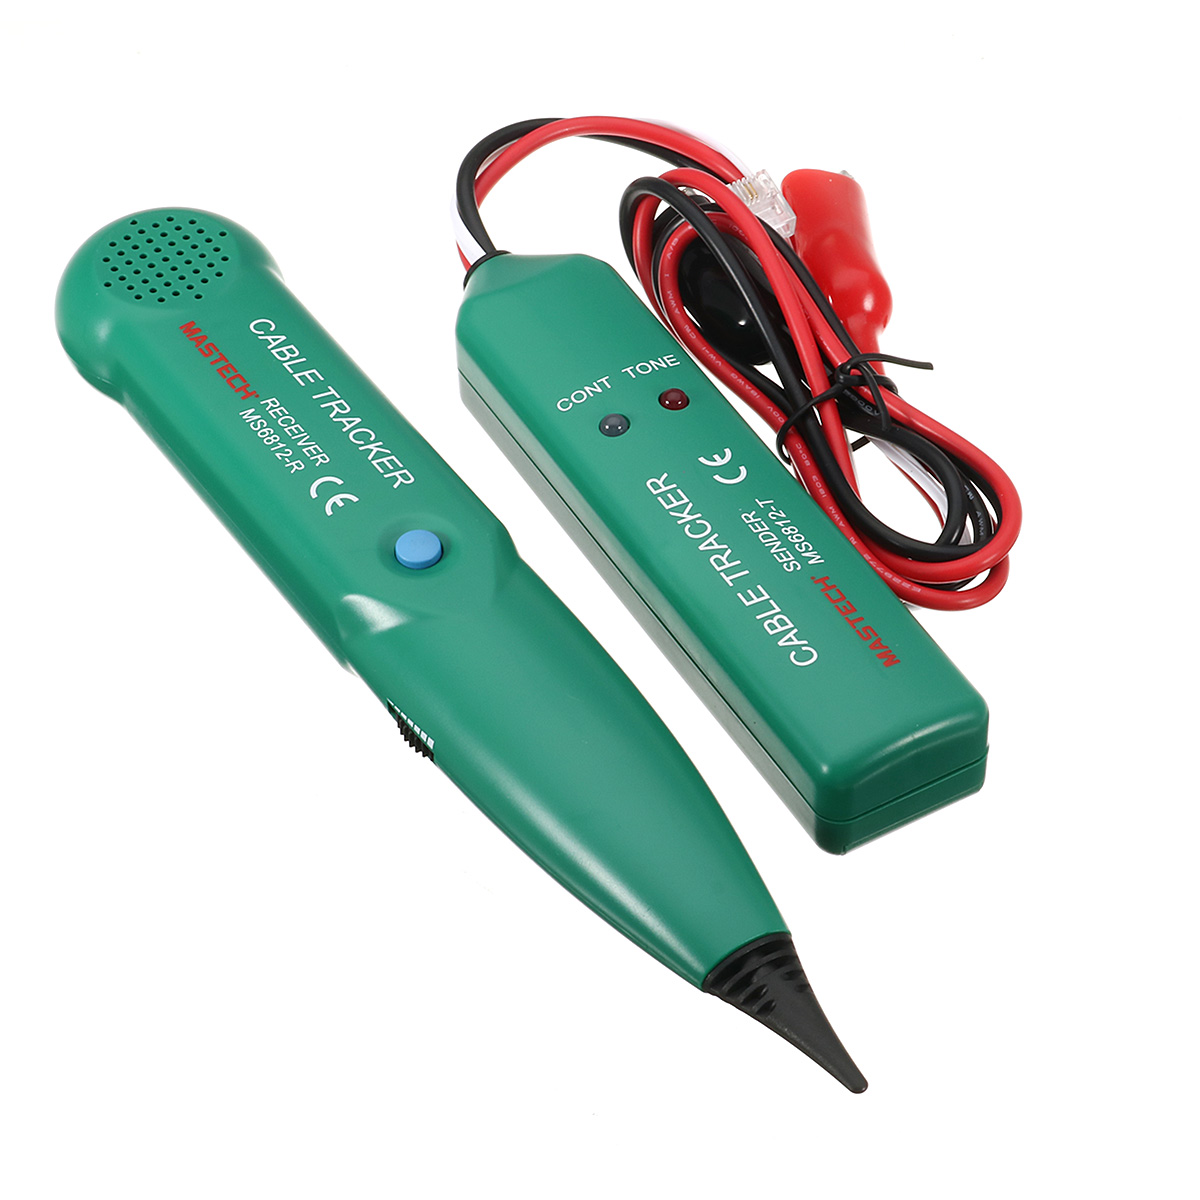 MS6812-Cable-Finder-Tone-Generator-Probe-Tracker-Wire-Network-Cable-Tester-Tracer-Kit-1288893-3